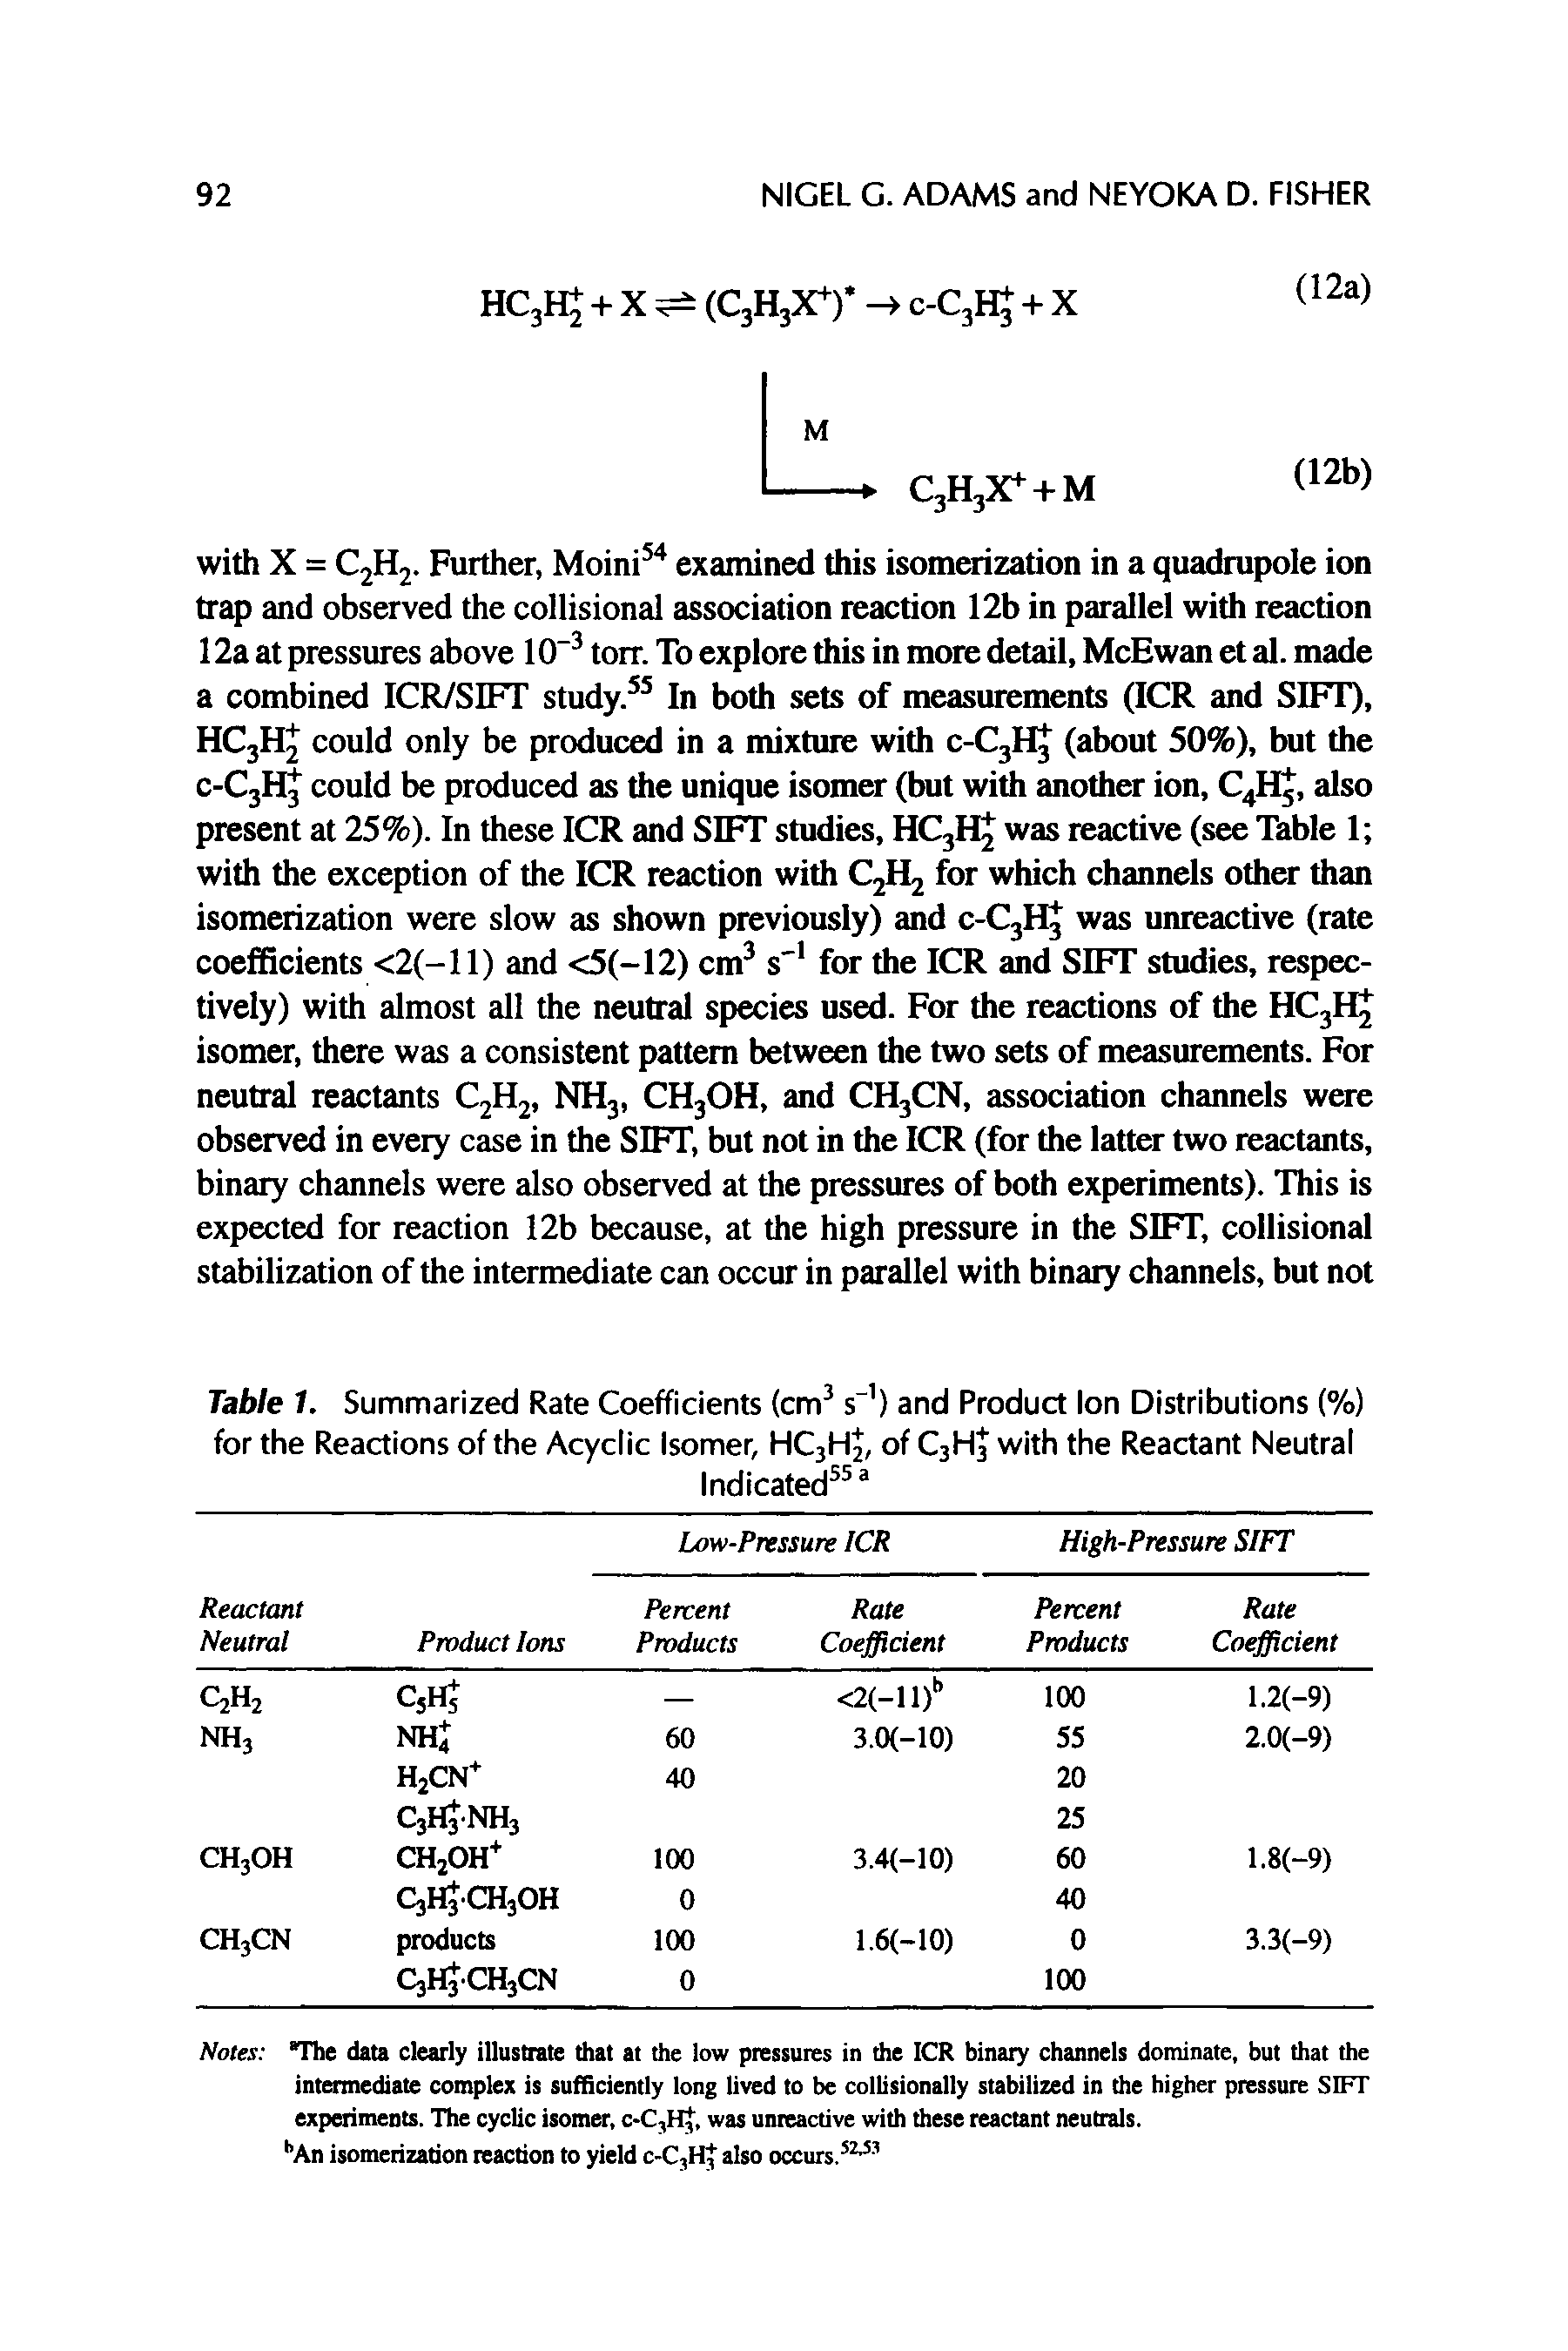 Table 1. Summarized Rate Coefficients (cm3 s 1) and Product Ion Distributions (%) for the Reactions of the Acyclic Isomer, HC3H2, of C3H3 with the Reactant Neutral...